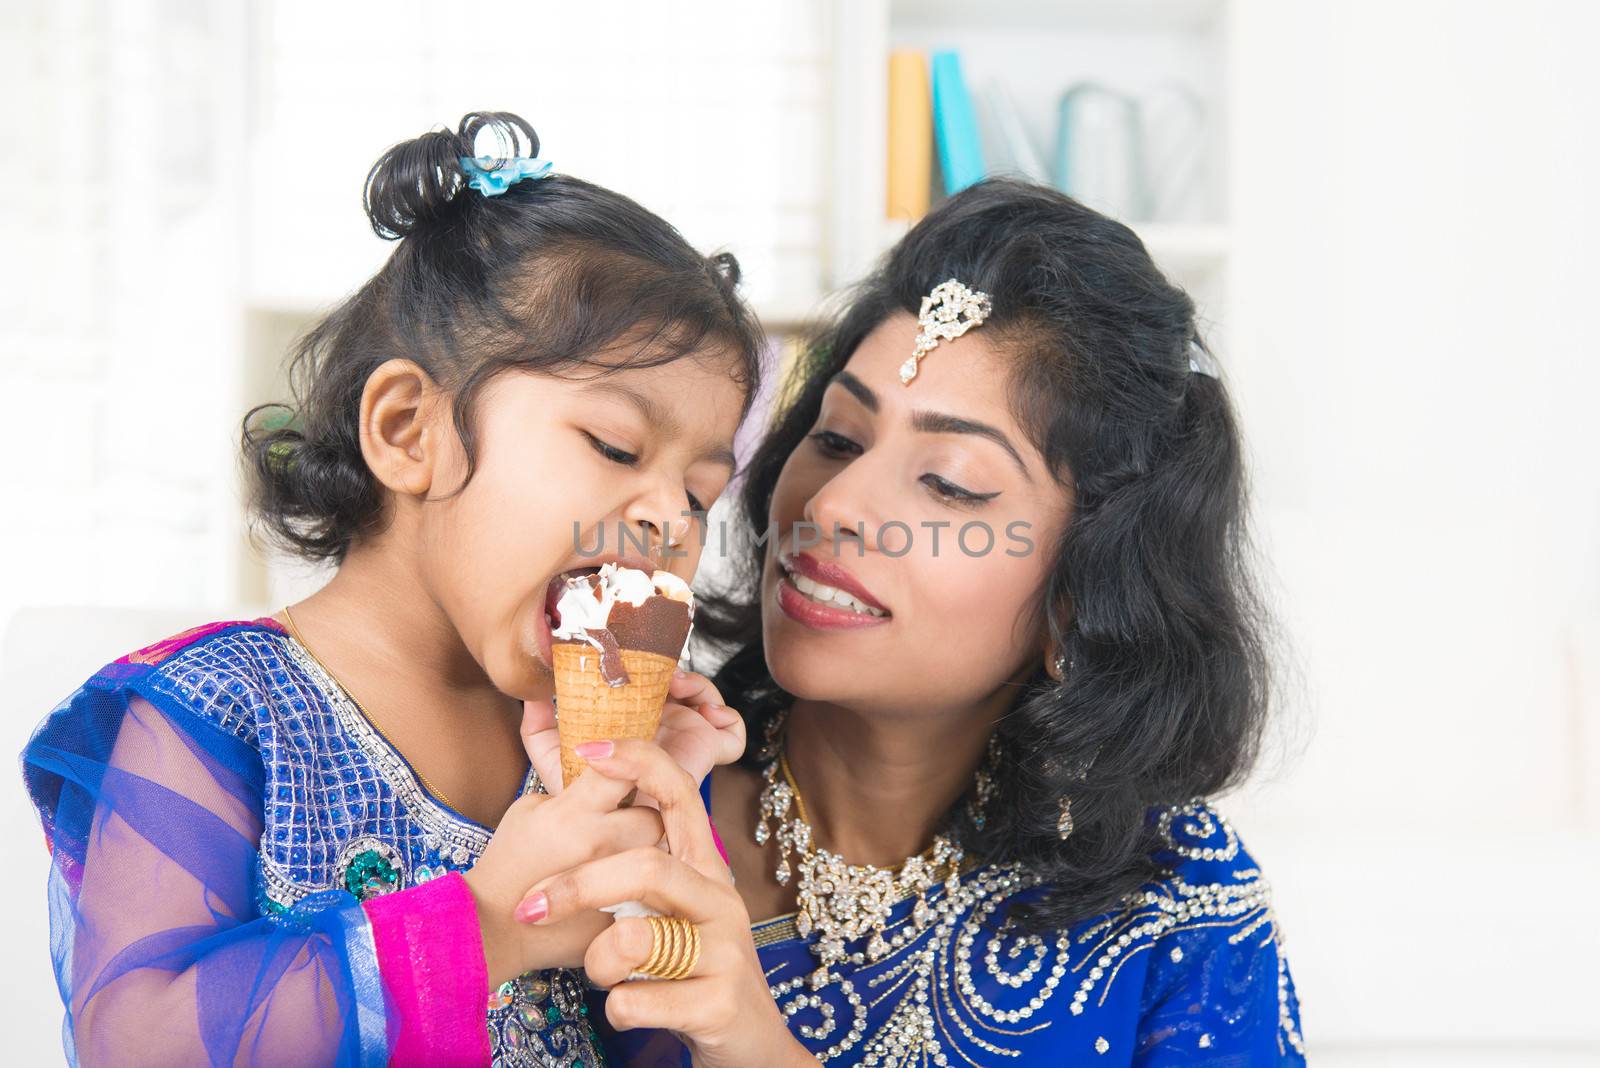 Eating ice-cream. Happy Asian India family sharing ice-cream at home. Beautiful Indian child licking ice-cream cone.